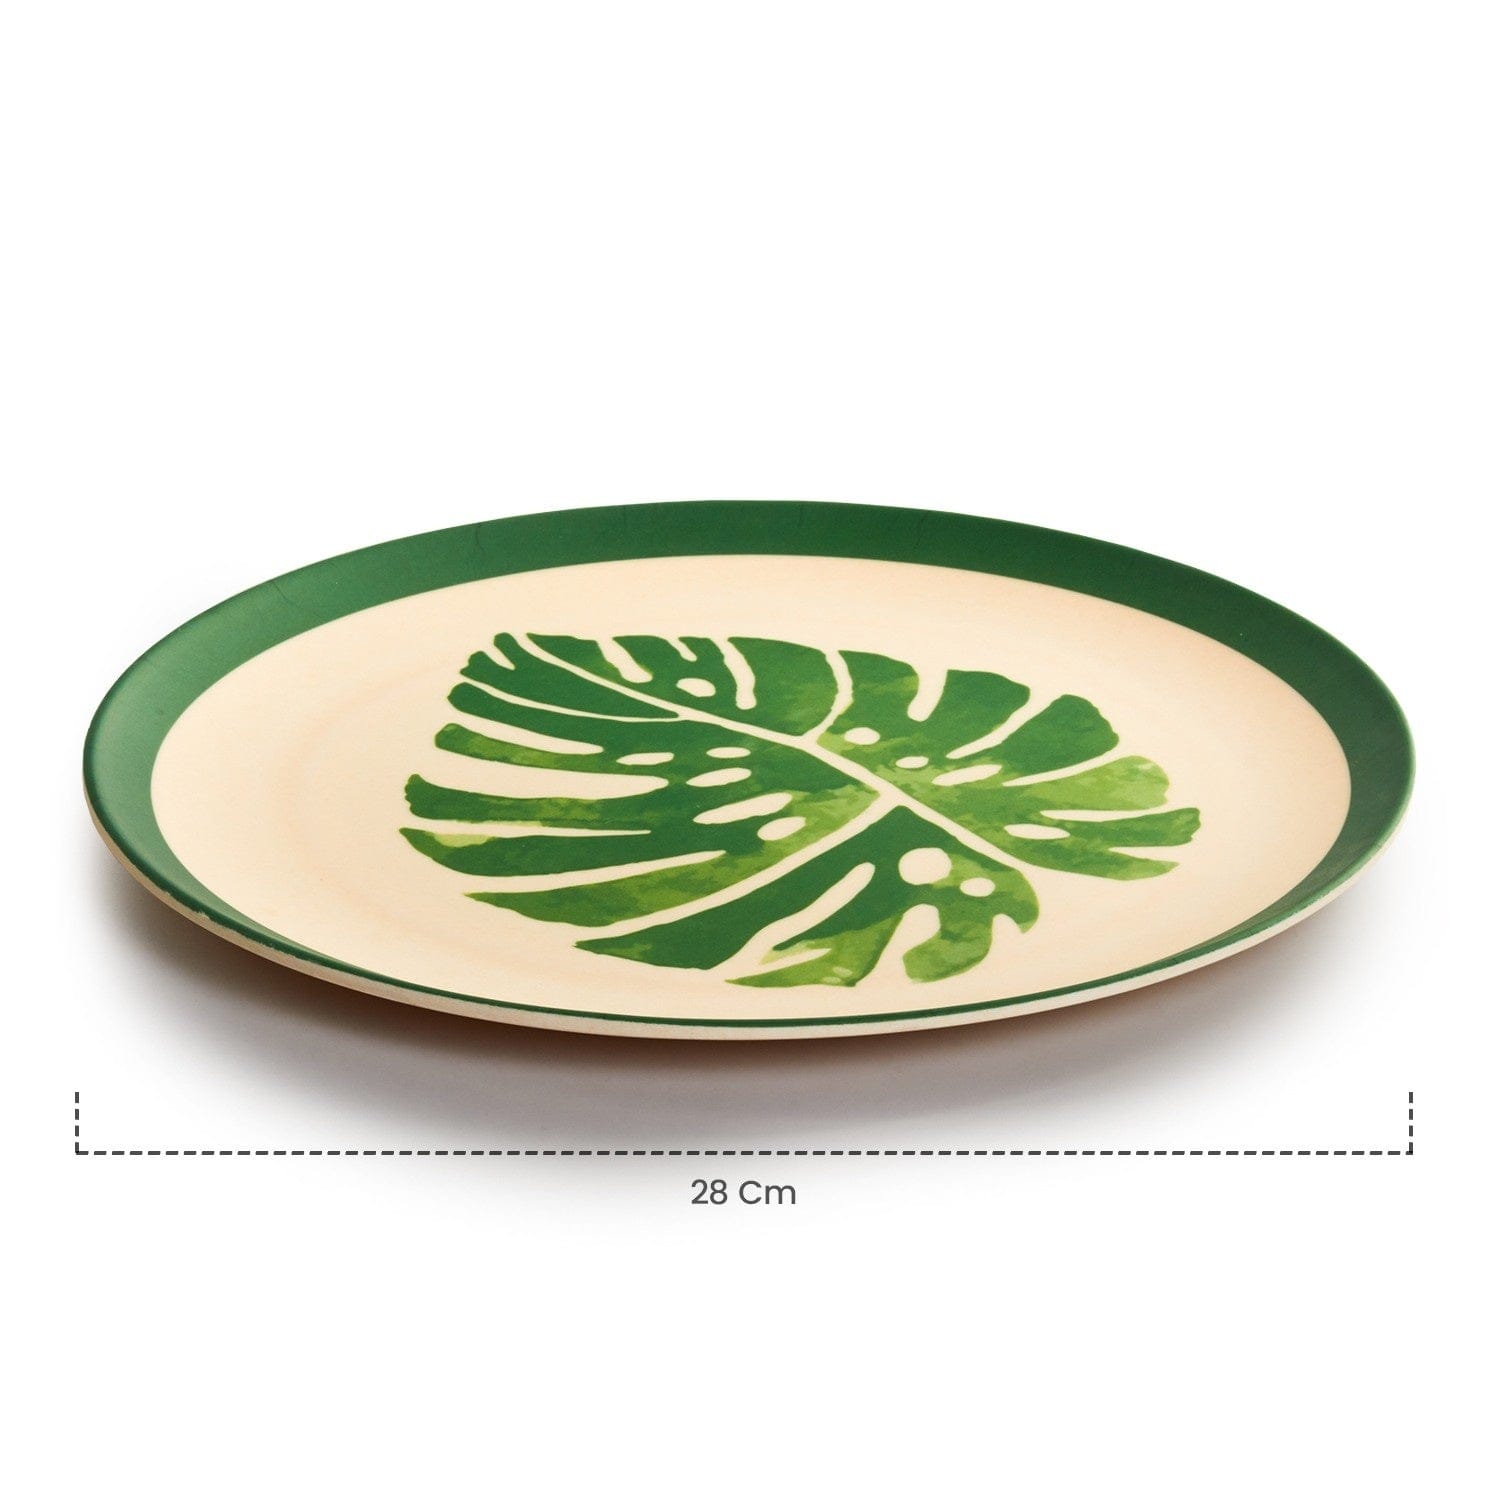 Red Butler Dinner Plates Bamboo Fibre Plate 11 inches | 6pcs Set | Leaf Design BP11A1 Daily-Use Eco-Friendly Bamboo Fiber Dinner Plate Stylish & Sustainable Redbutler